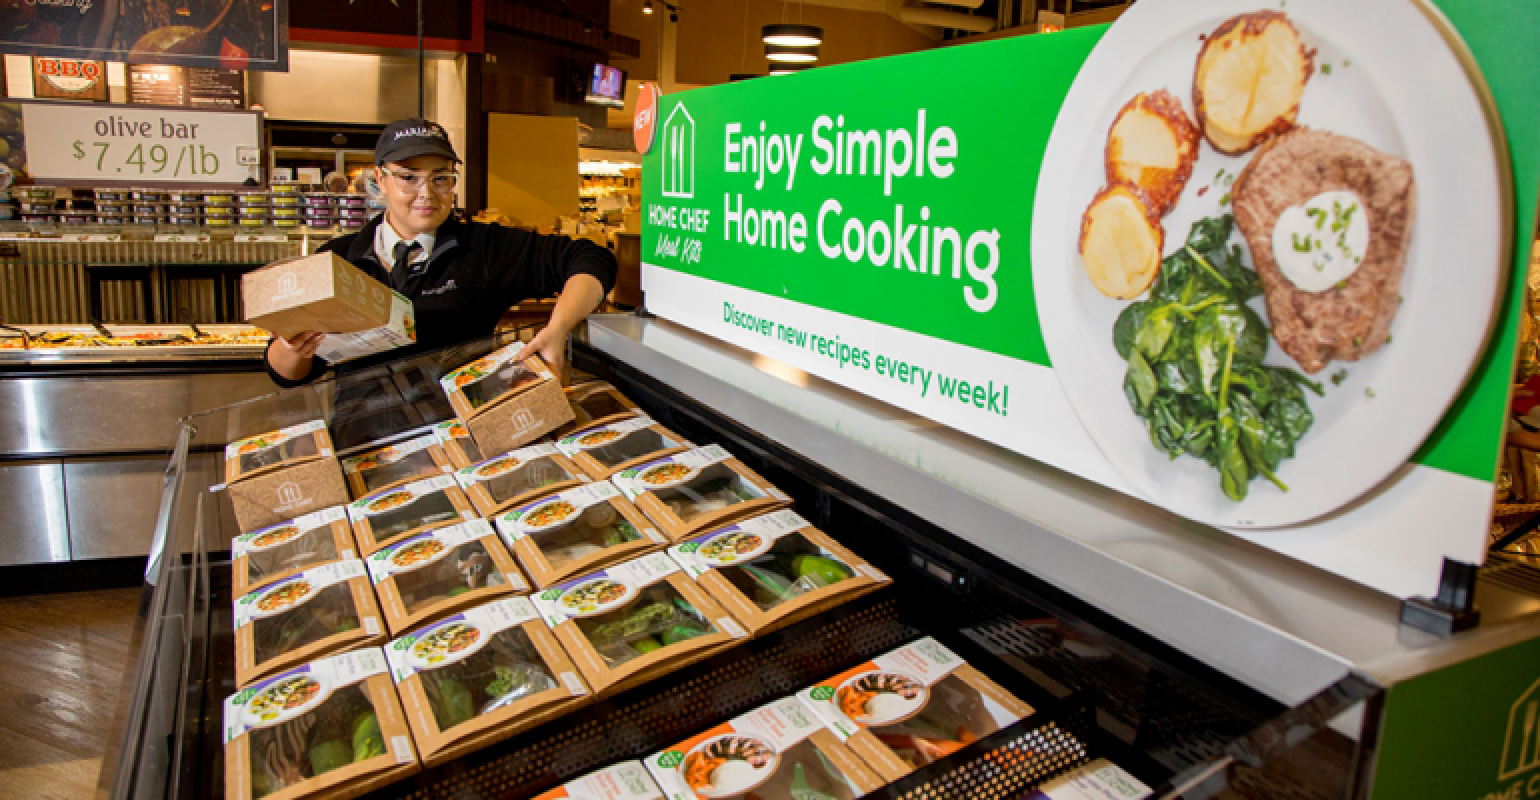 Will Meal Kit Delivery Survive? Is In-store Pick-up the Future of